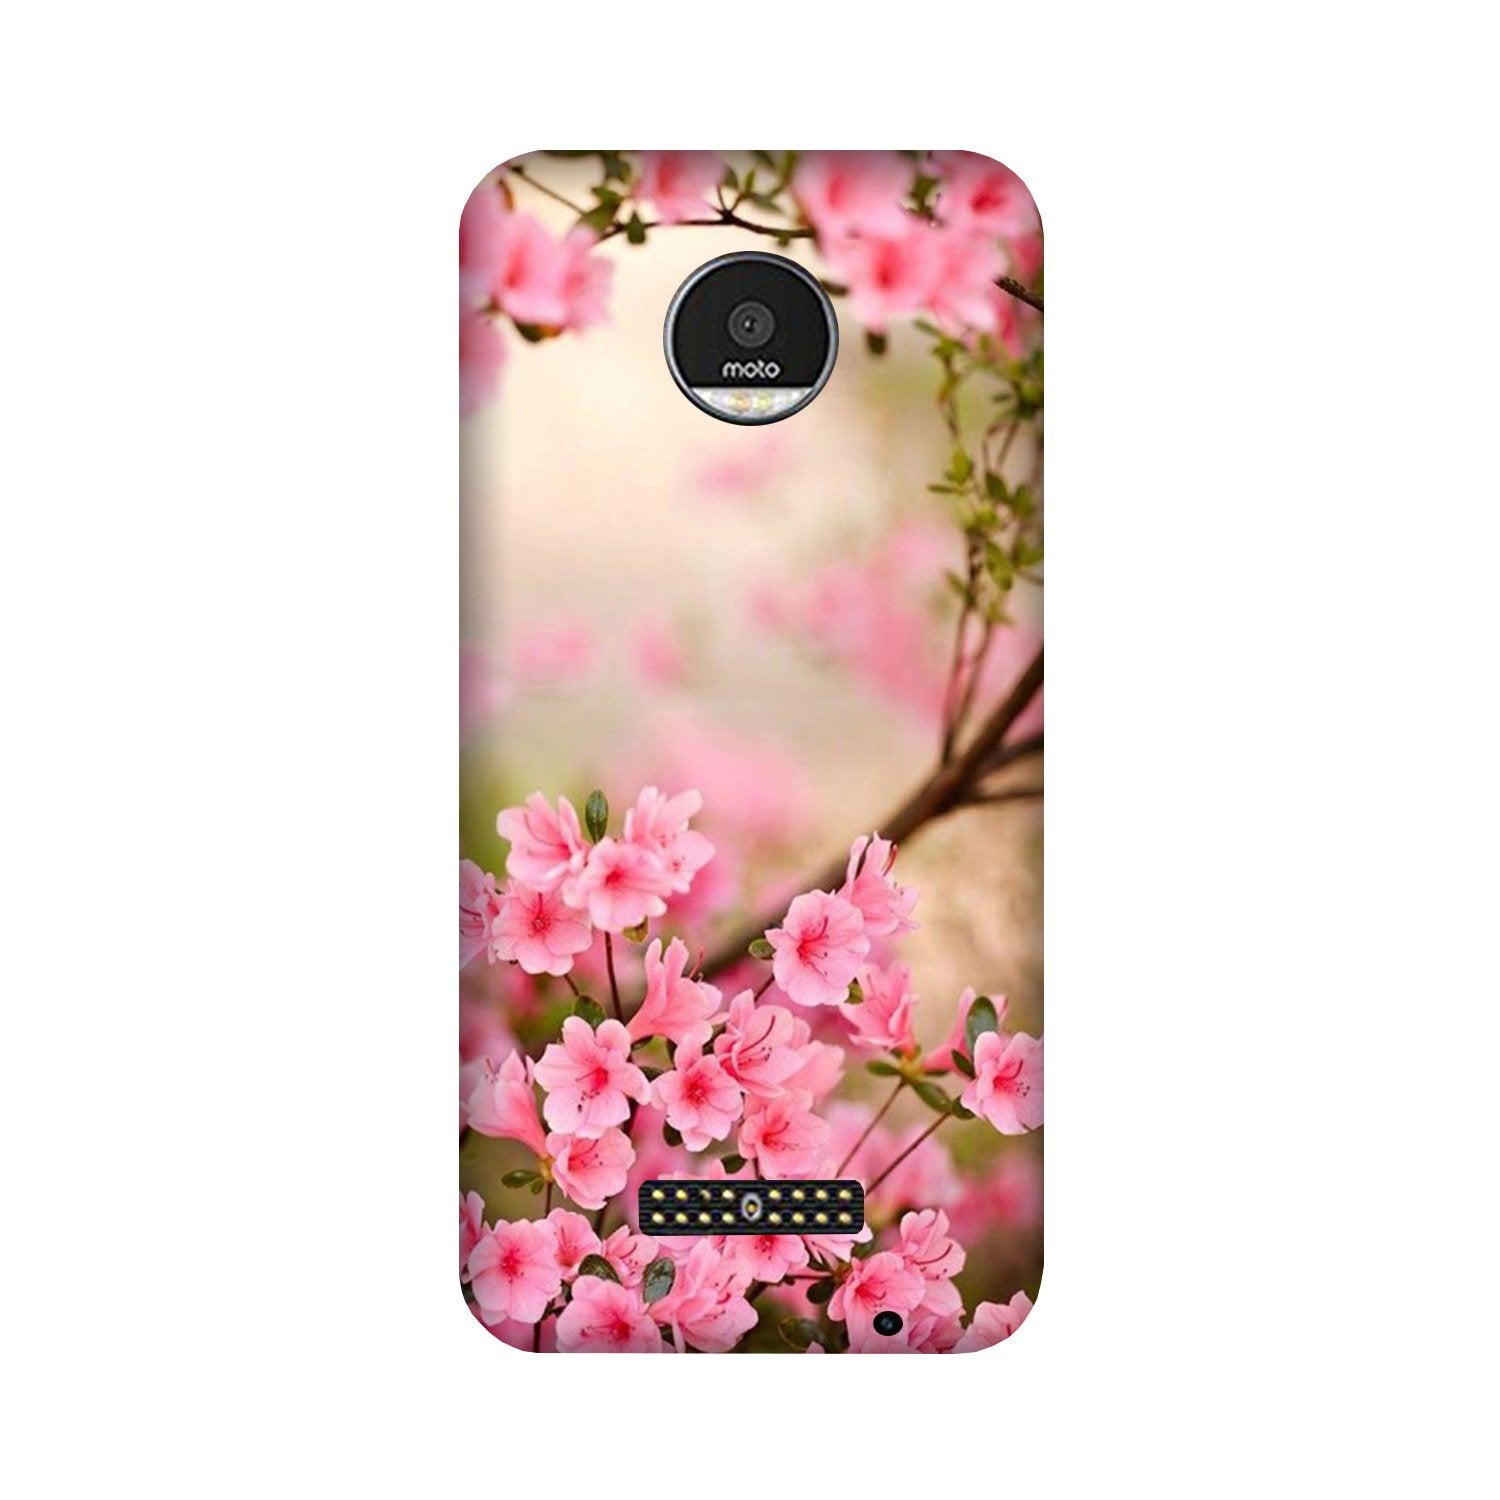 Pink flowers Case for Moto Z2 Play